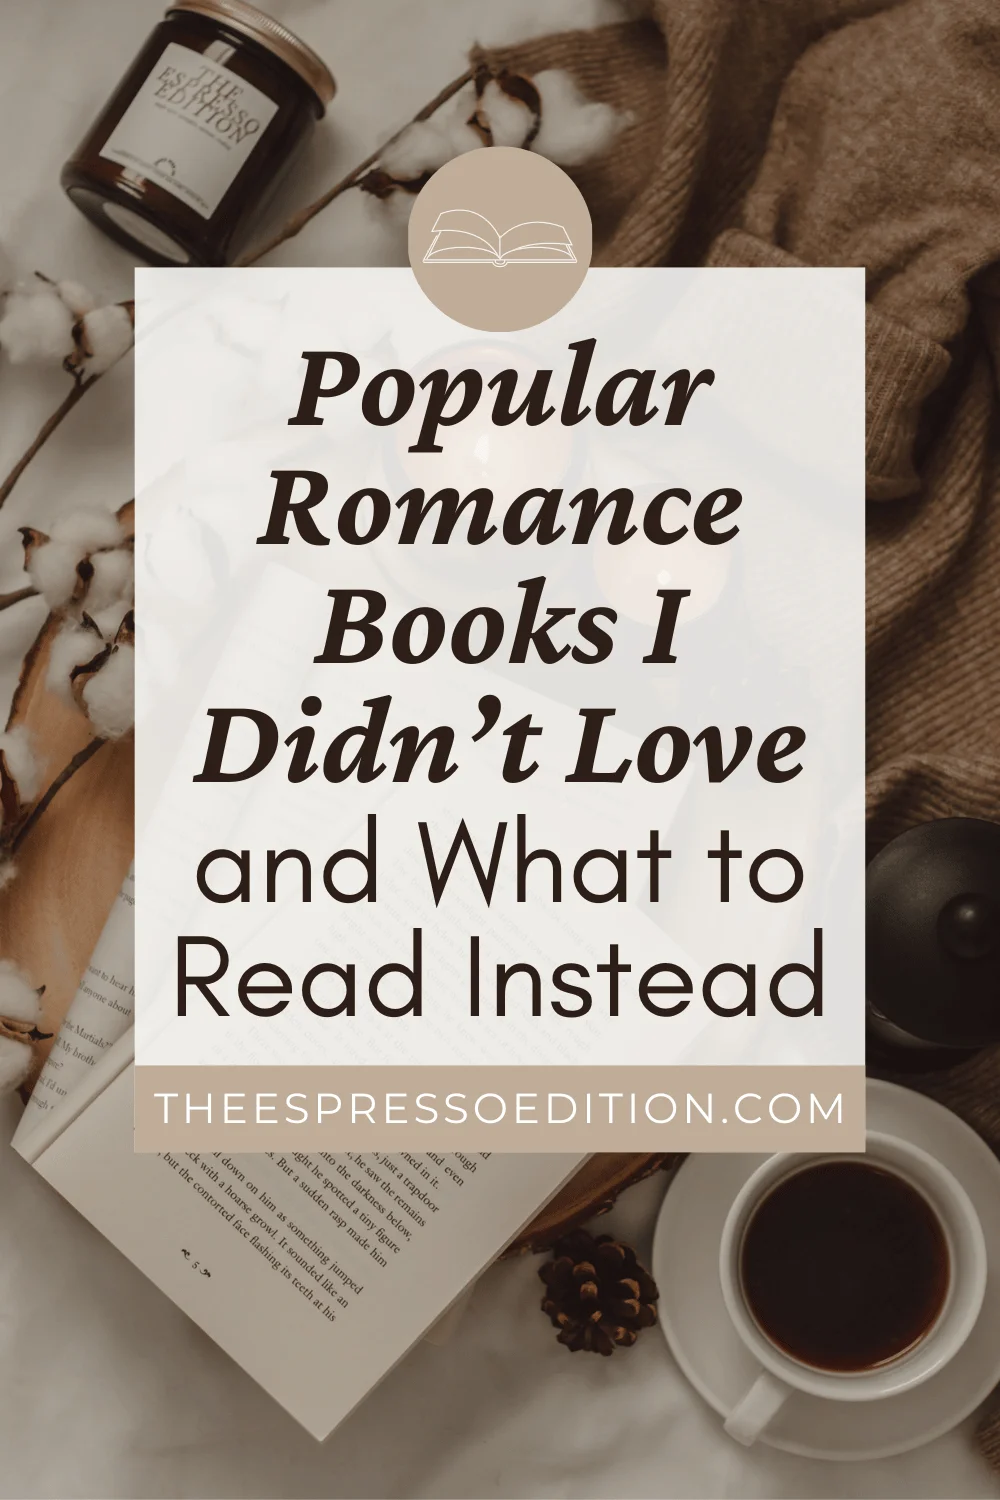 Popular Romance Books I Didn't Love and What to Read Instead by The Espresso Edition cozy bookish blog